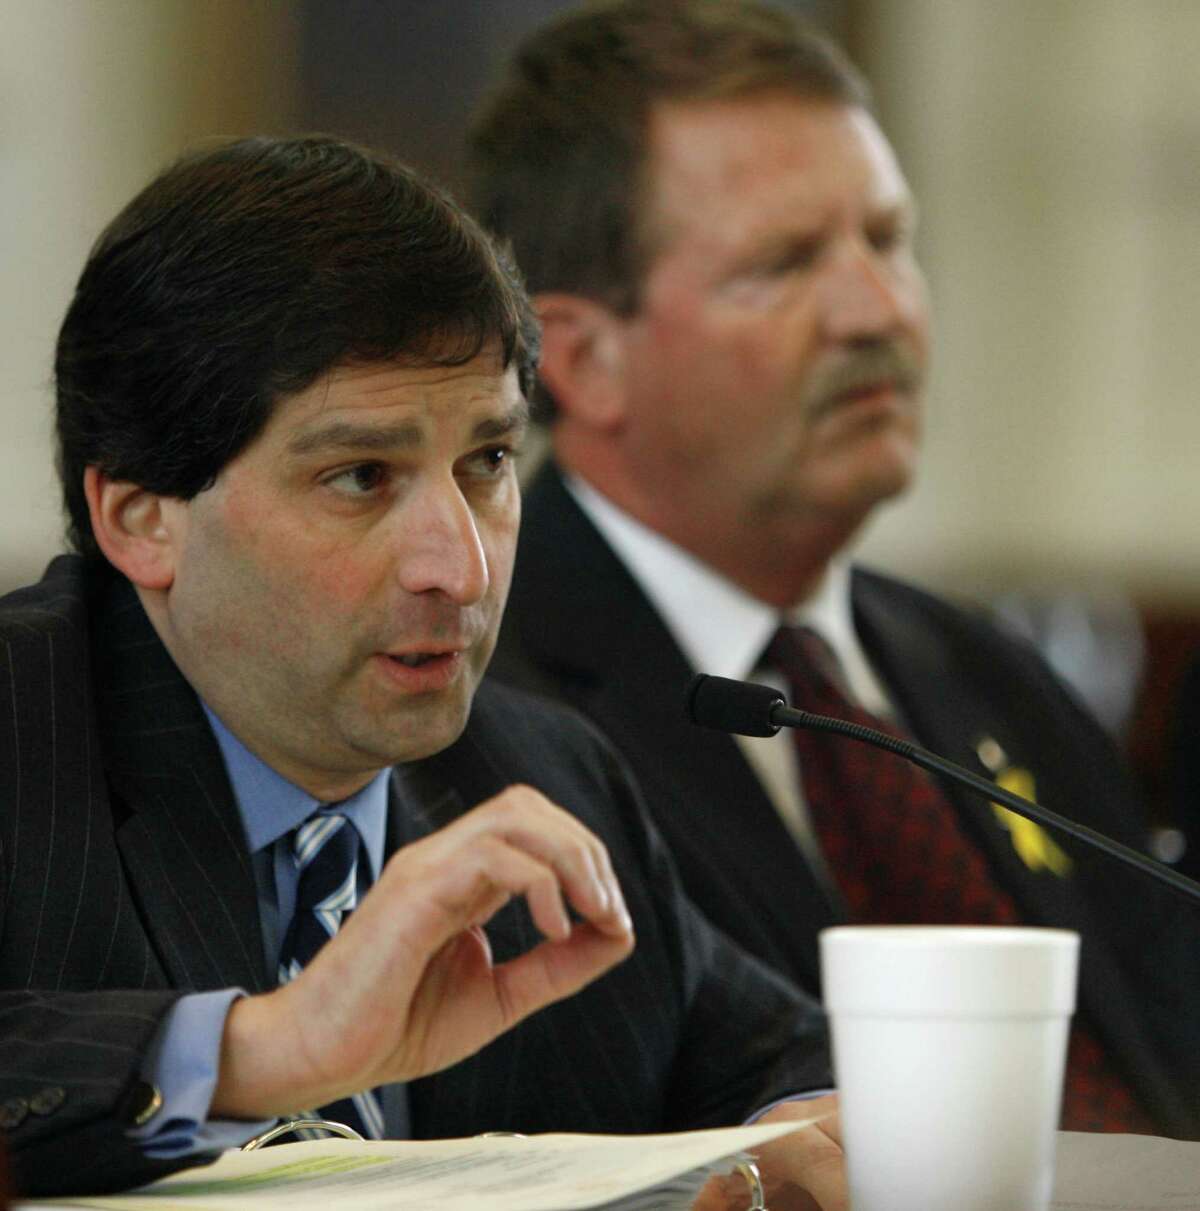 Sen. Kevin Eltife, R-Tyler, left, questions Albert Hawkins, Texas' Health and Human Services commissioner, during a meeting of the Senate Nominations Committee Wednesday, Feb. 28, 2007, in Austin, Texas. Sen. Mike Jackson, R-League City, right, chairs the committee. The committee left pending Hawkins' renomination to the post. (AP Photo/Harry Cabluck)